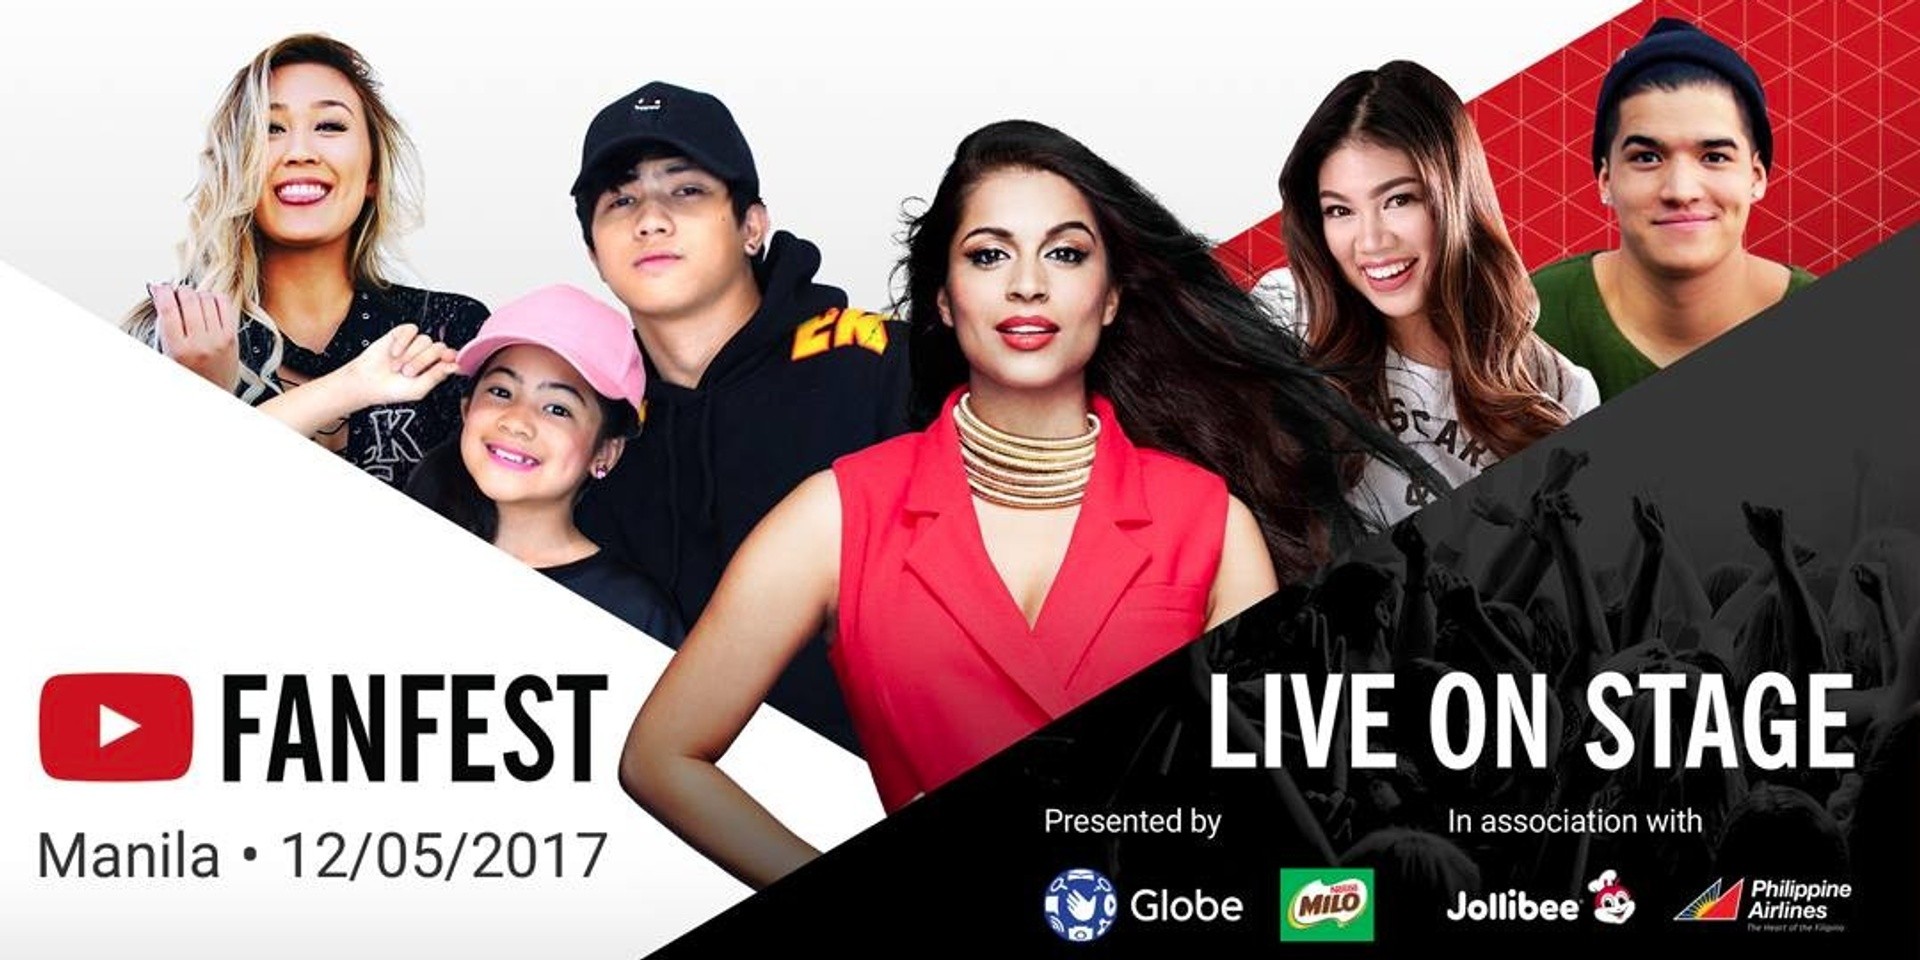 Watch the YouTube Fan Fest from your favorite Ayala Mall